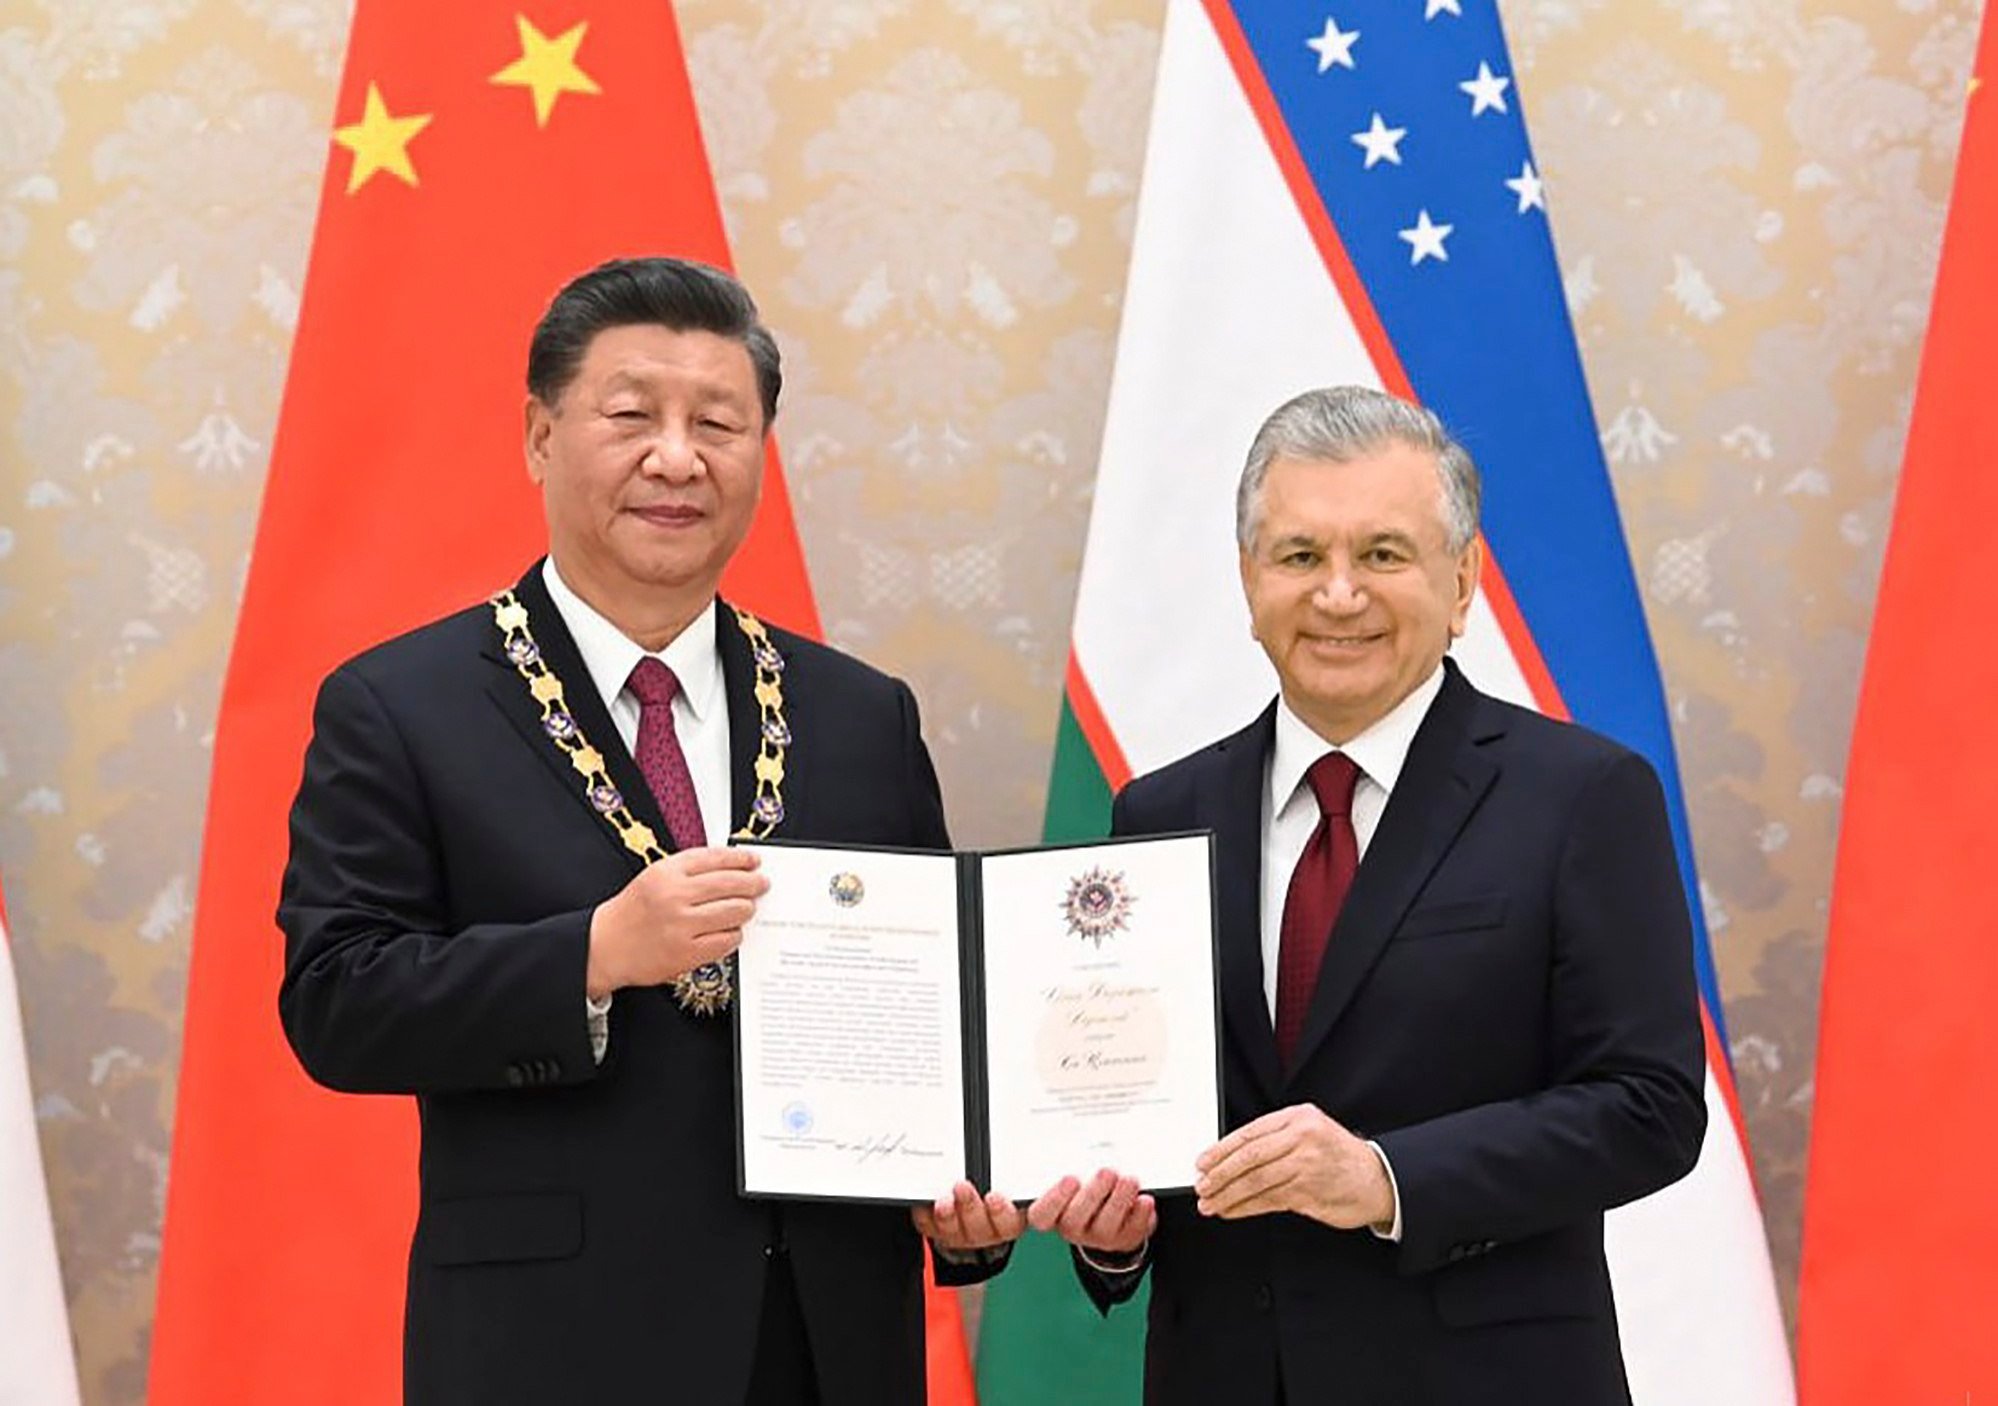 Uzbekistan President Shavkat Mirziyoyev (right) poses with President Xi Jinping after awarding him the Order of Holy Friendship before the Shanghai Cooperation Organisation summit in Samarkand, Uzbekistan, in September 2022. Bilateral trade and Chinese investment in Uzbekistan have risen steadily in recent years as Uzbekistan purses a raft of reforms in its modernisation efforts. Photo: EPA-EFE